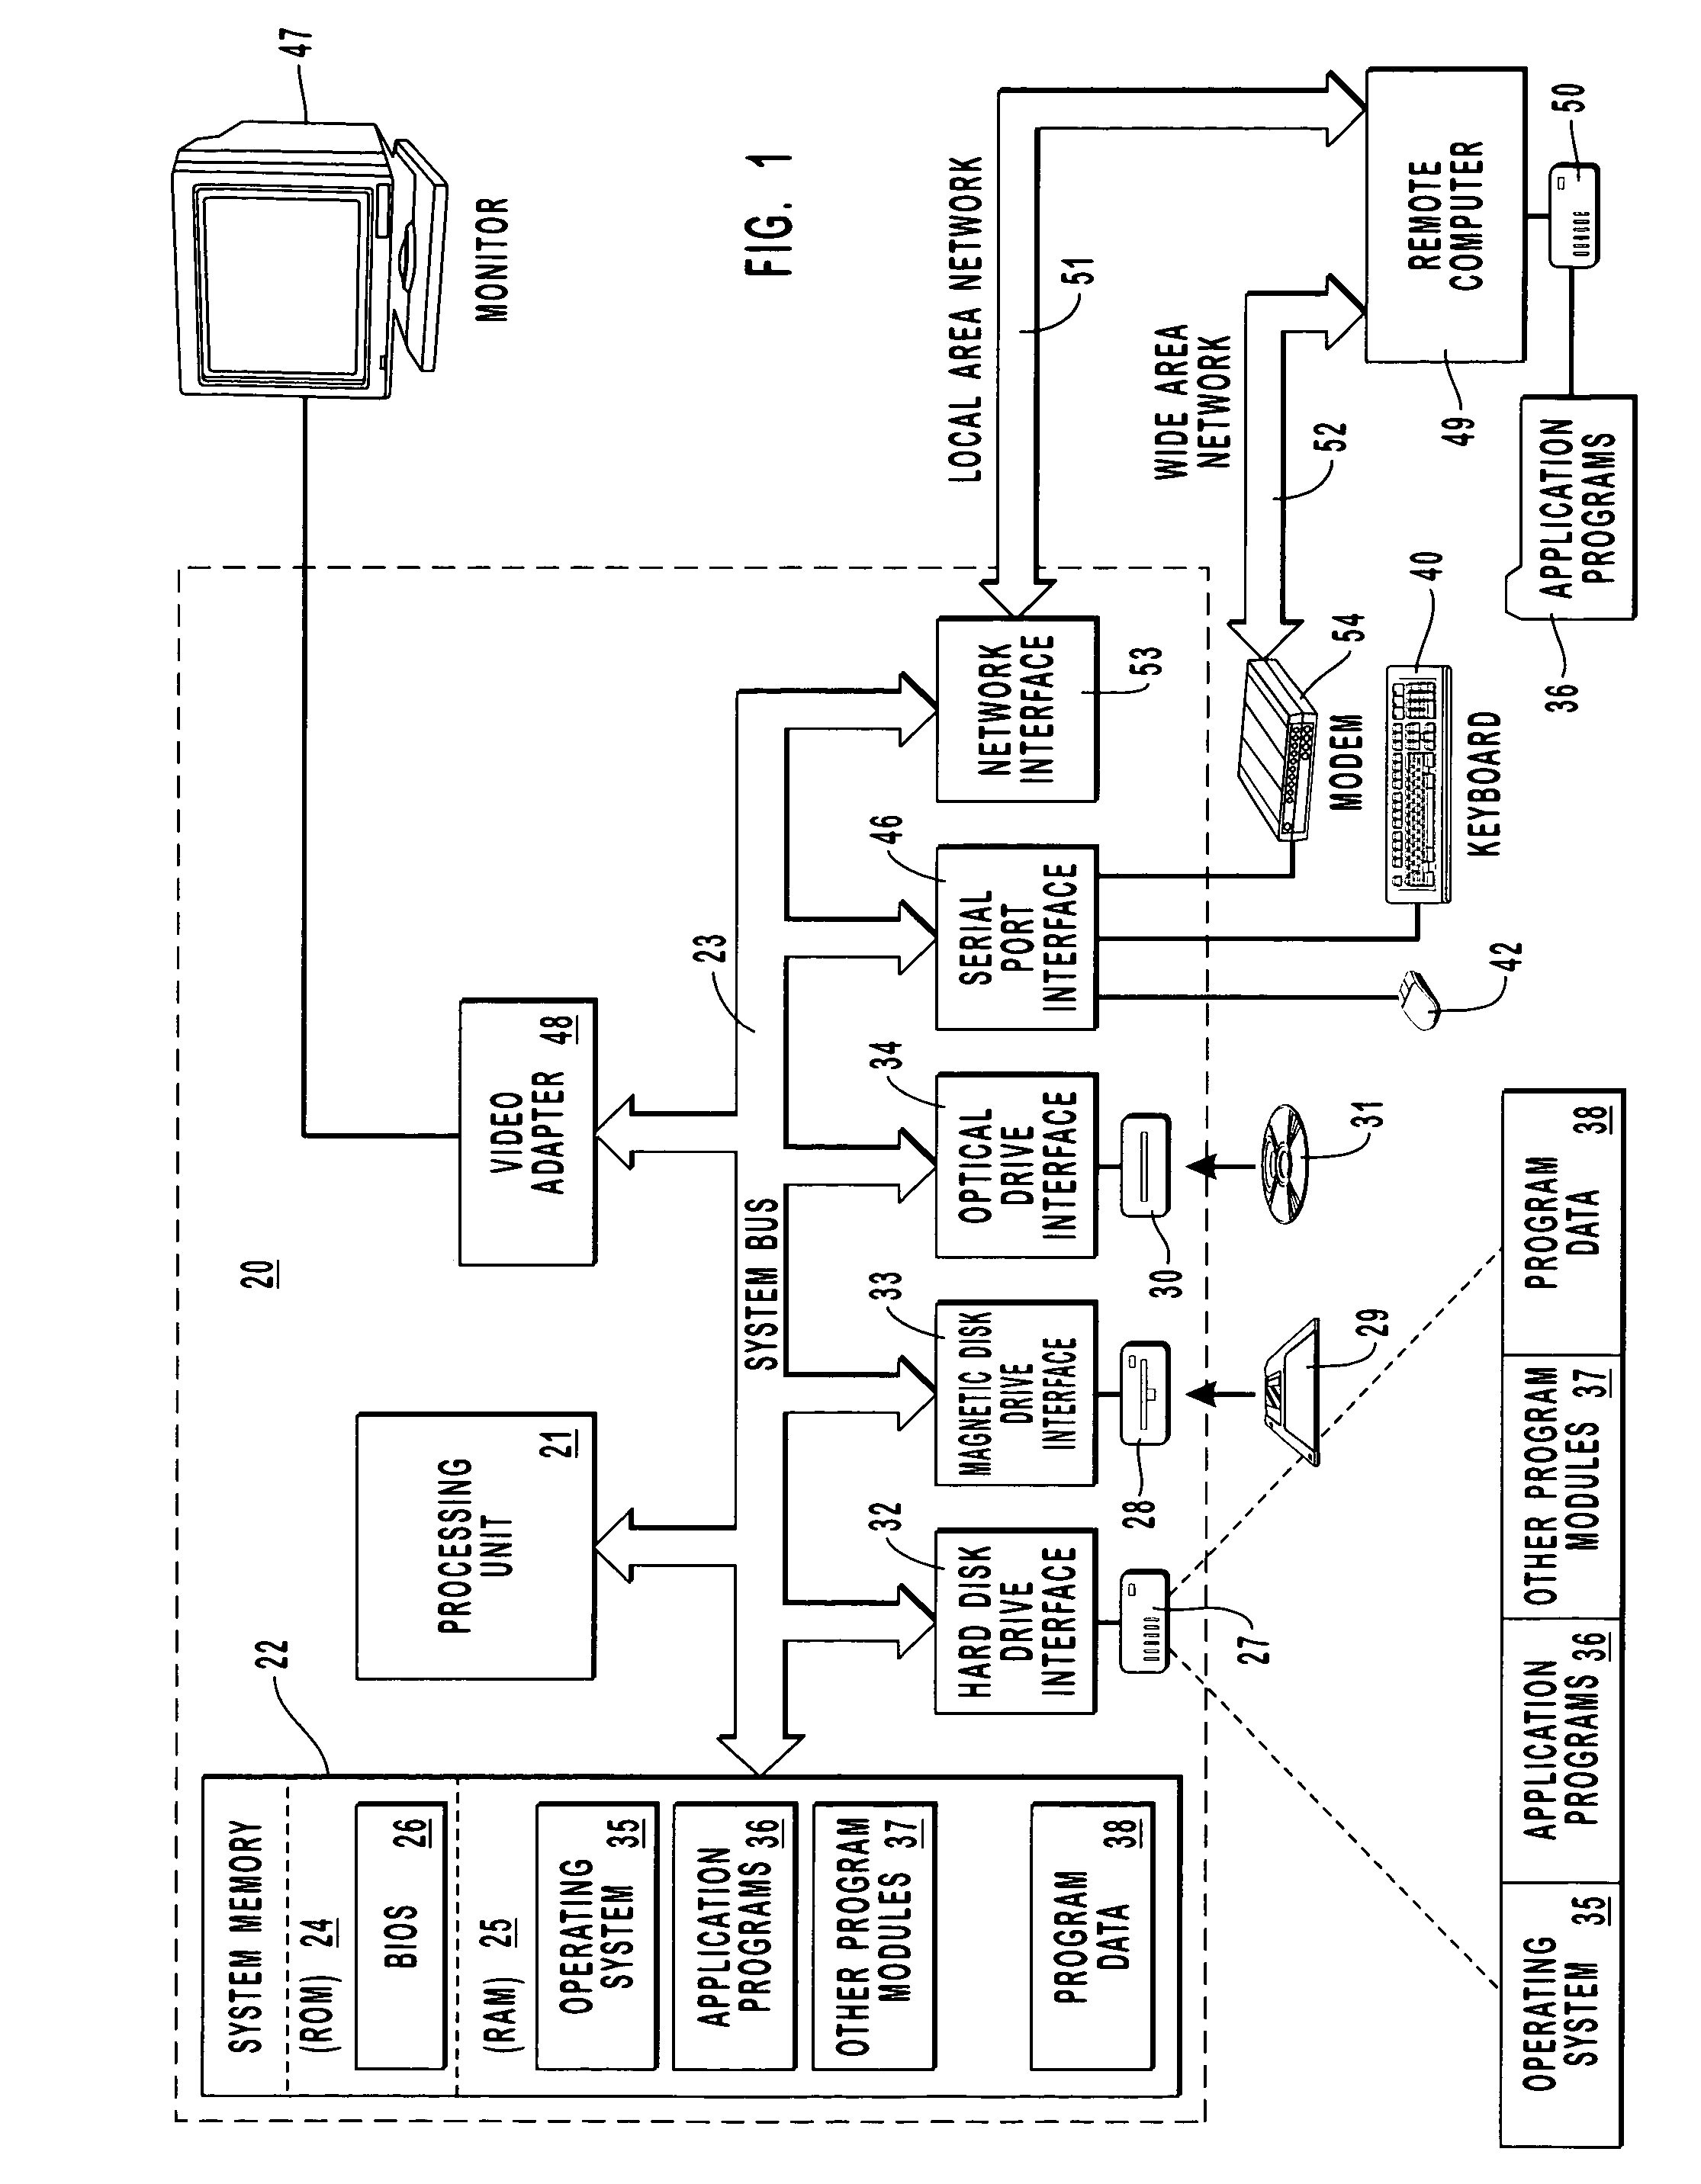 Systems and methods for integrating access control with a namespace